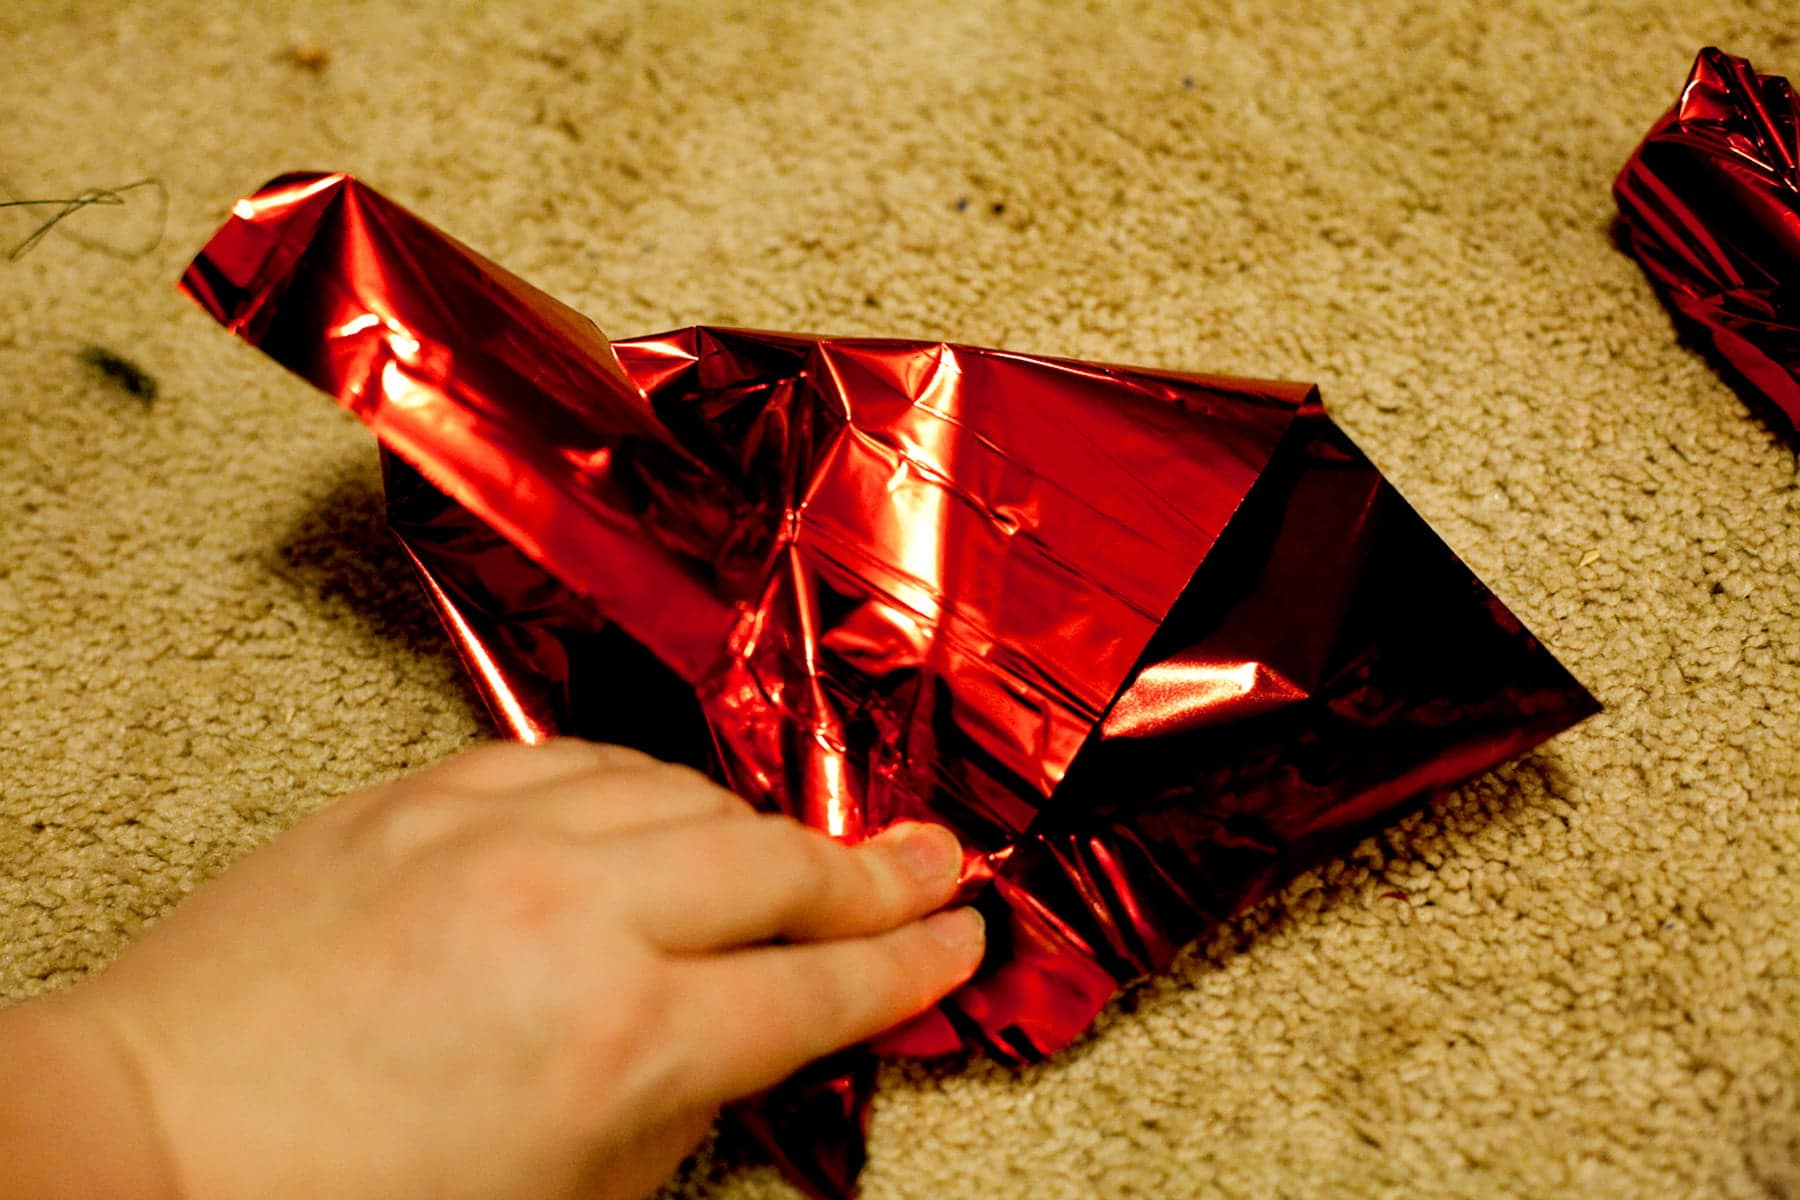 A hand is shown folding a square of red mylar over a mini liquor bottle.